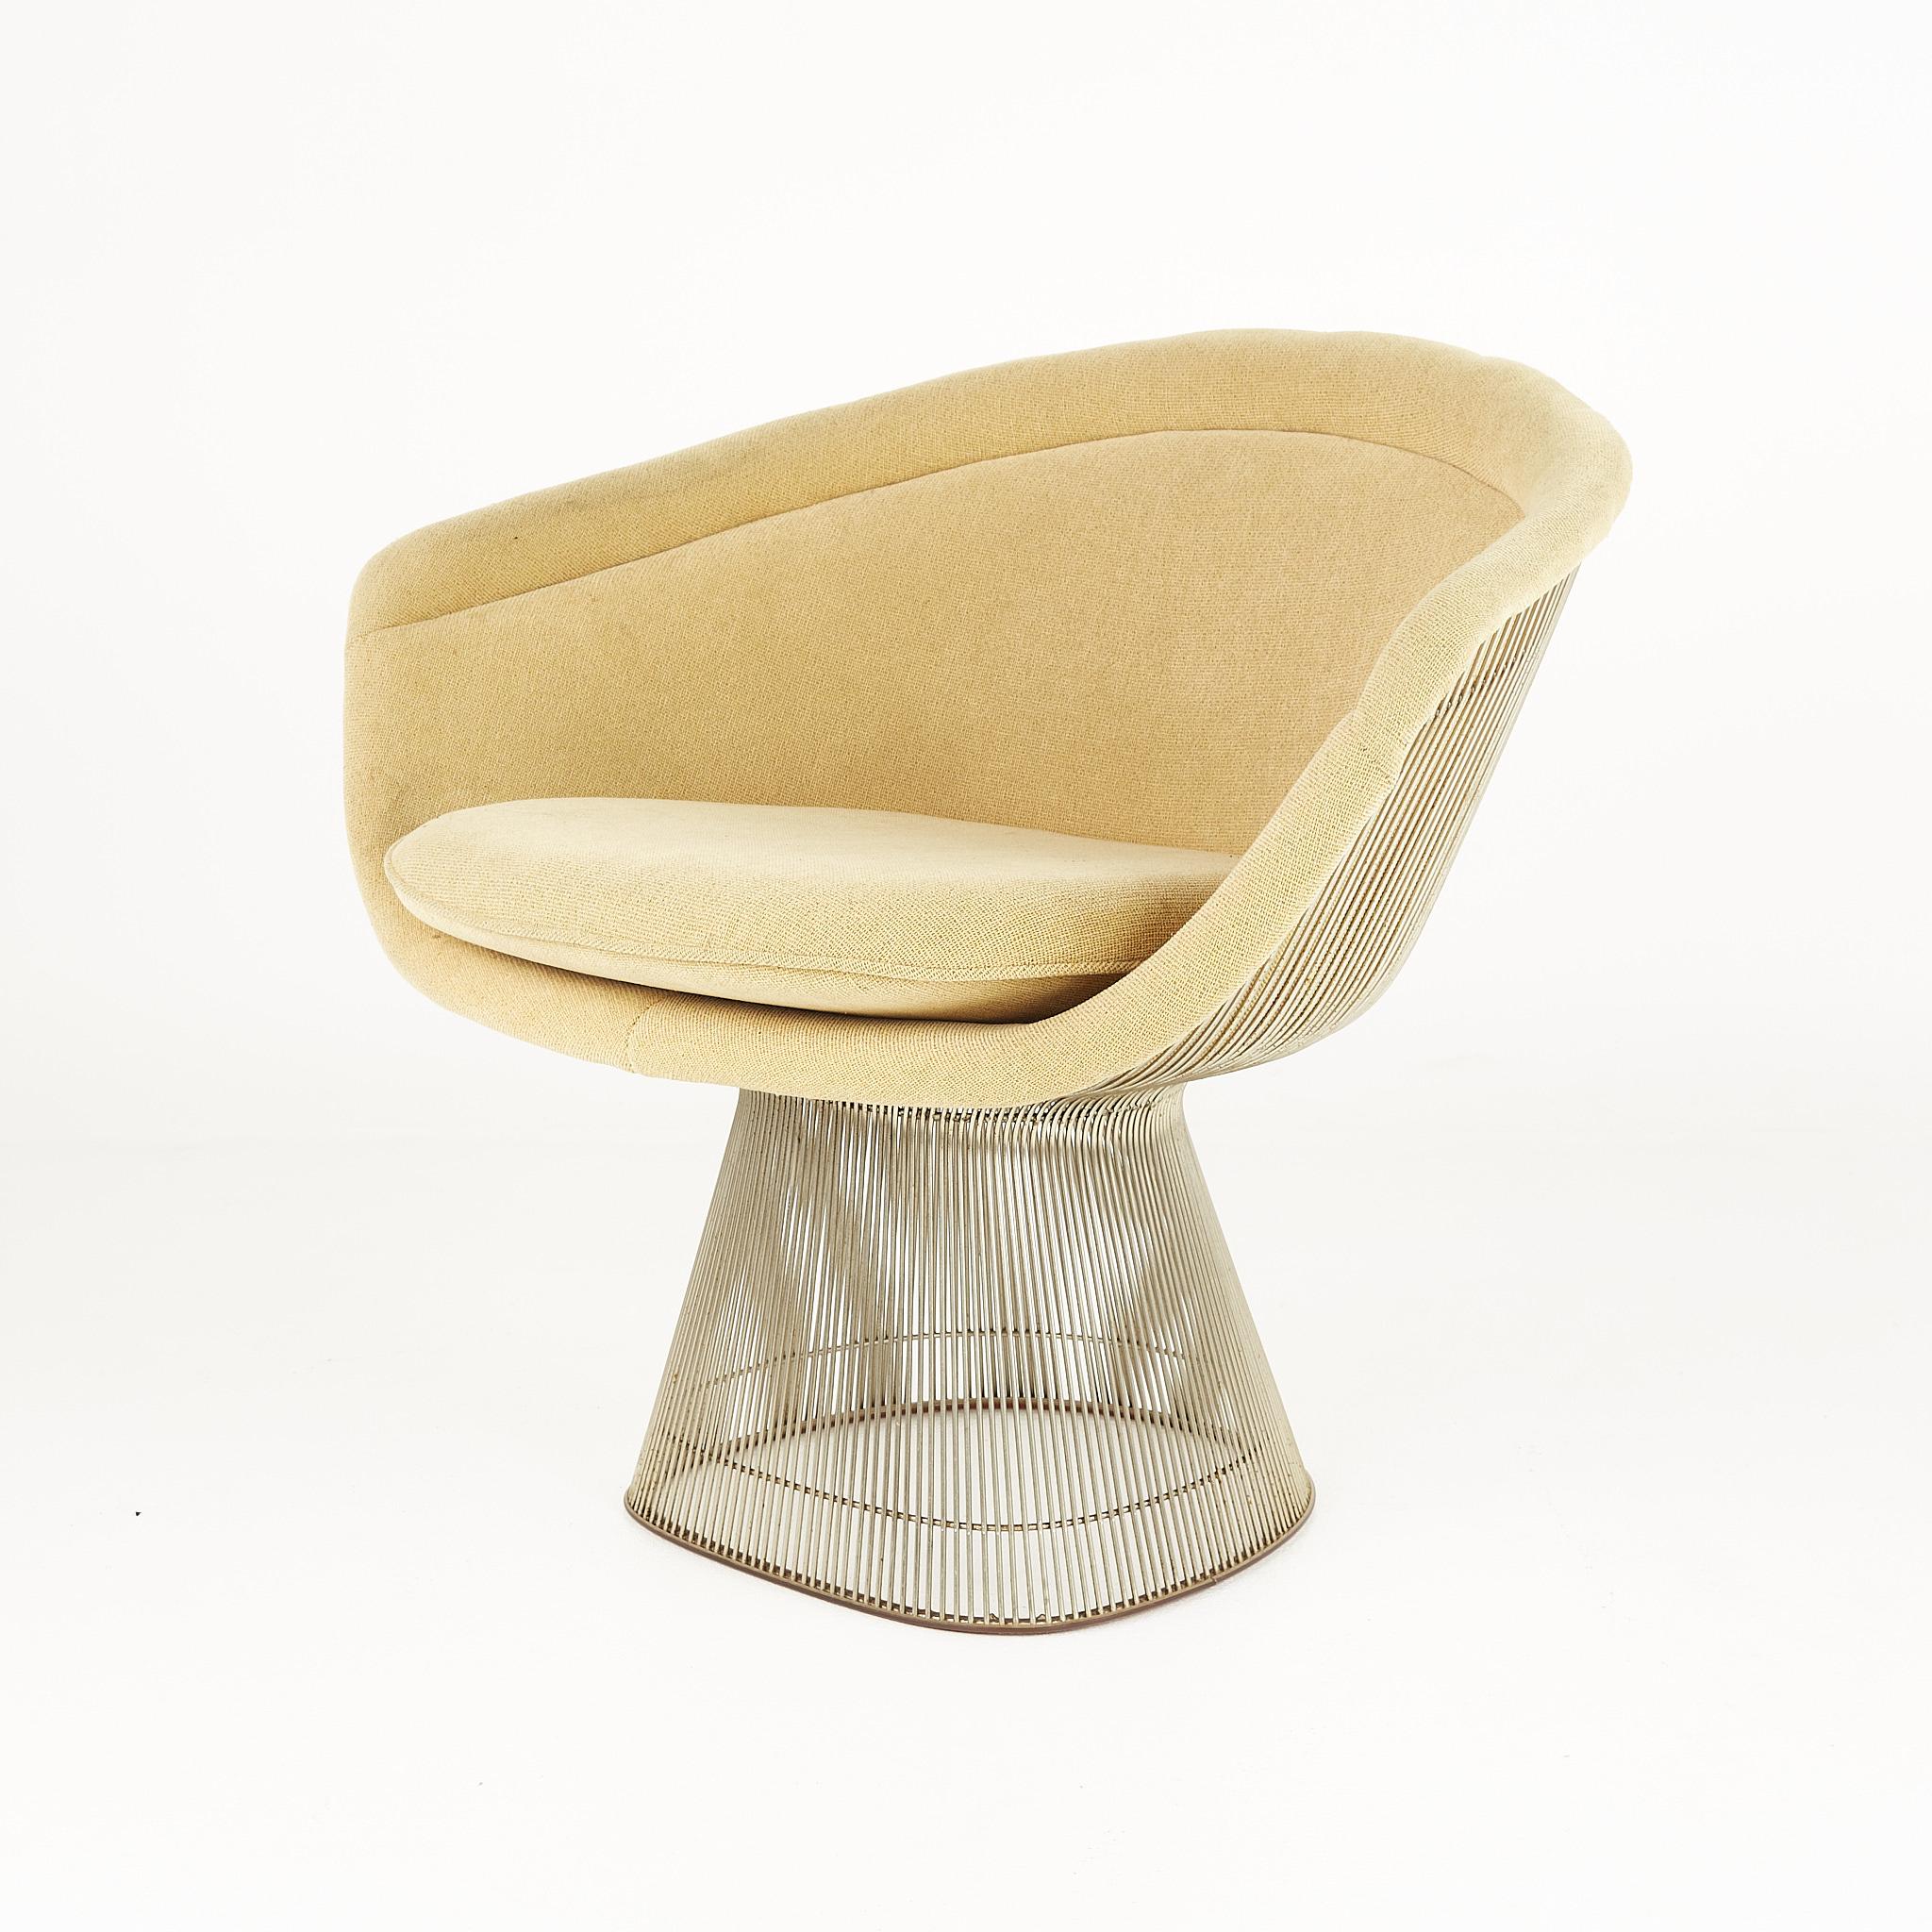 Late 20th Century Warren Platner for Knoll Mid Century Lounge Chairs, Pair